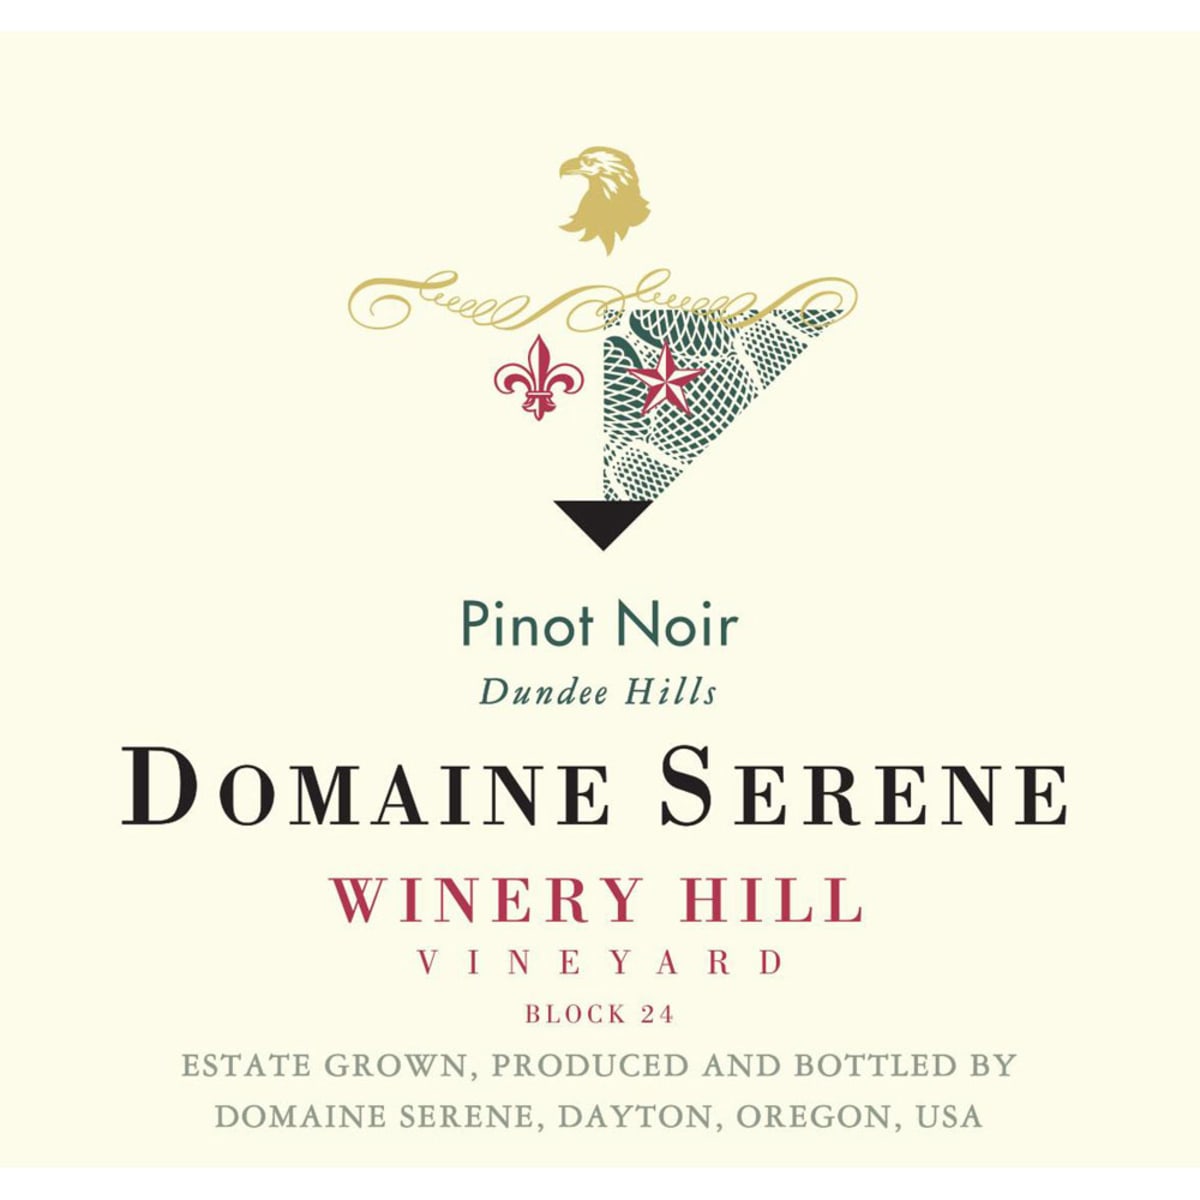 Domaine Serene Winery Hill Vineyard Pinot Noir 2013 Front Label